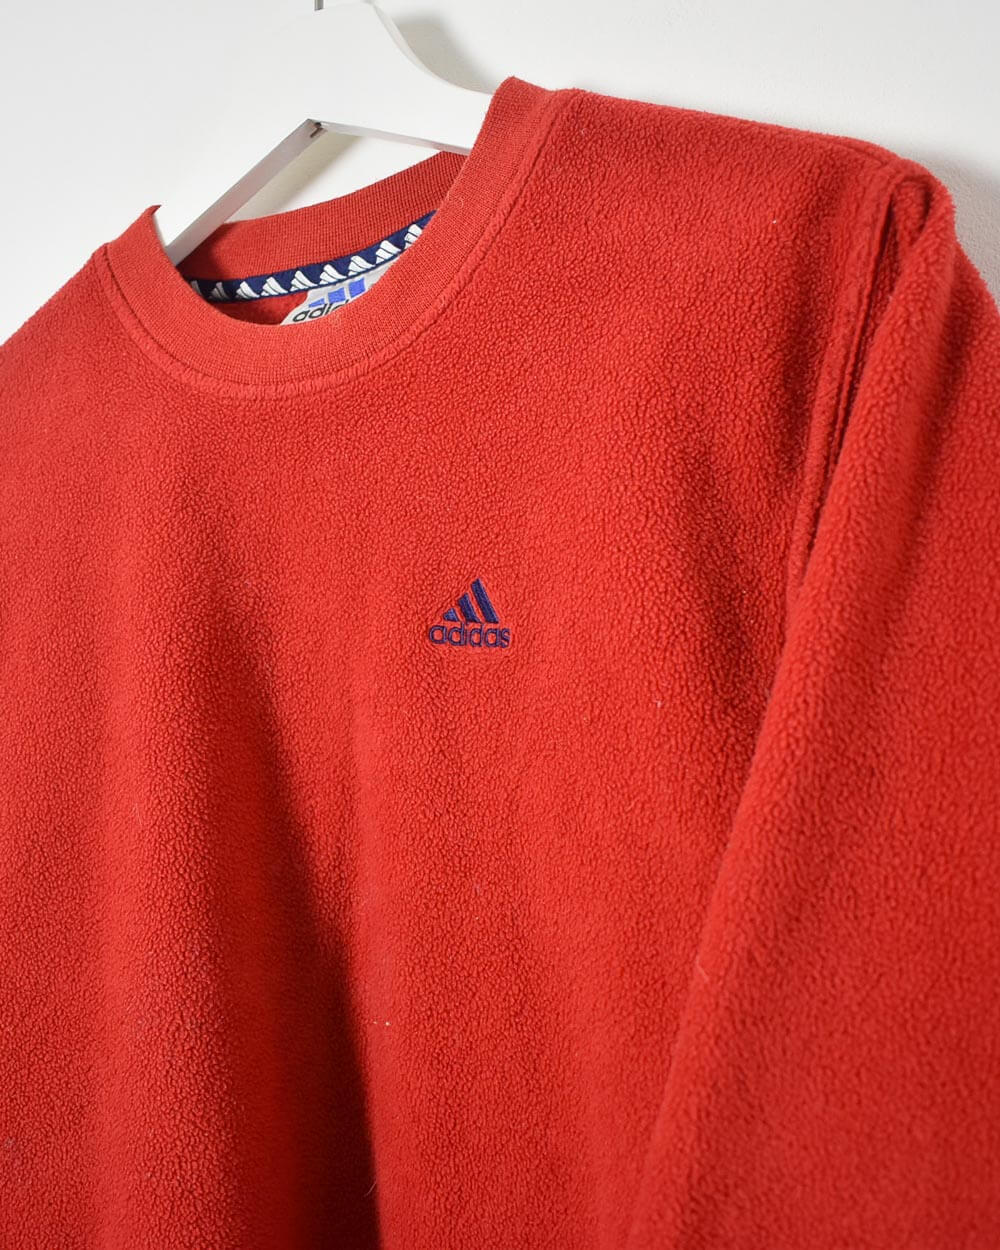 Adidas Pullover Fleece - X-Small - Domno Vintage 90s, 80s, 00s Retro and Vintage Clothing 